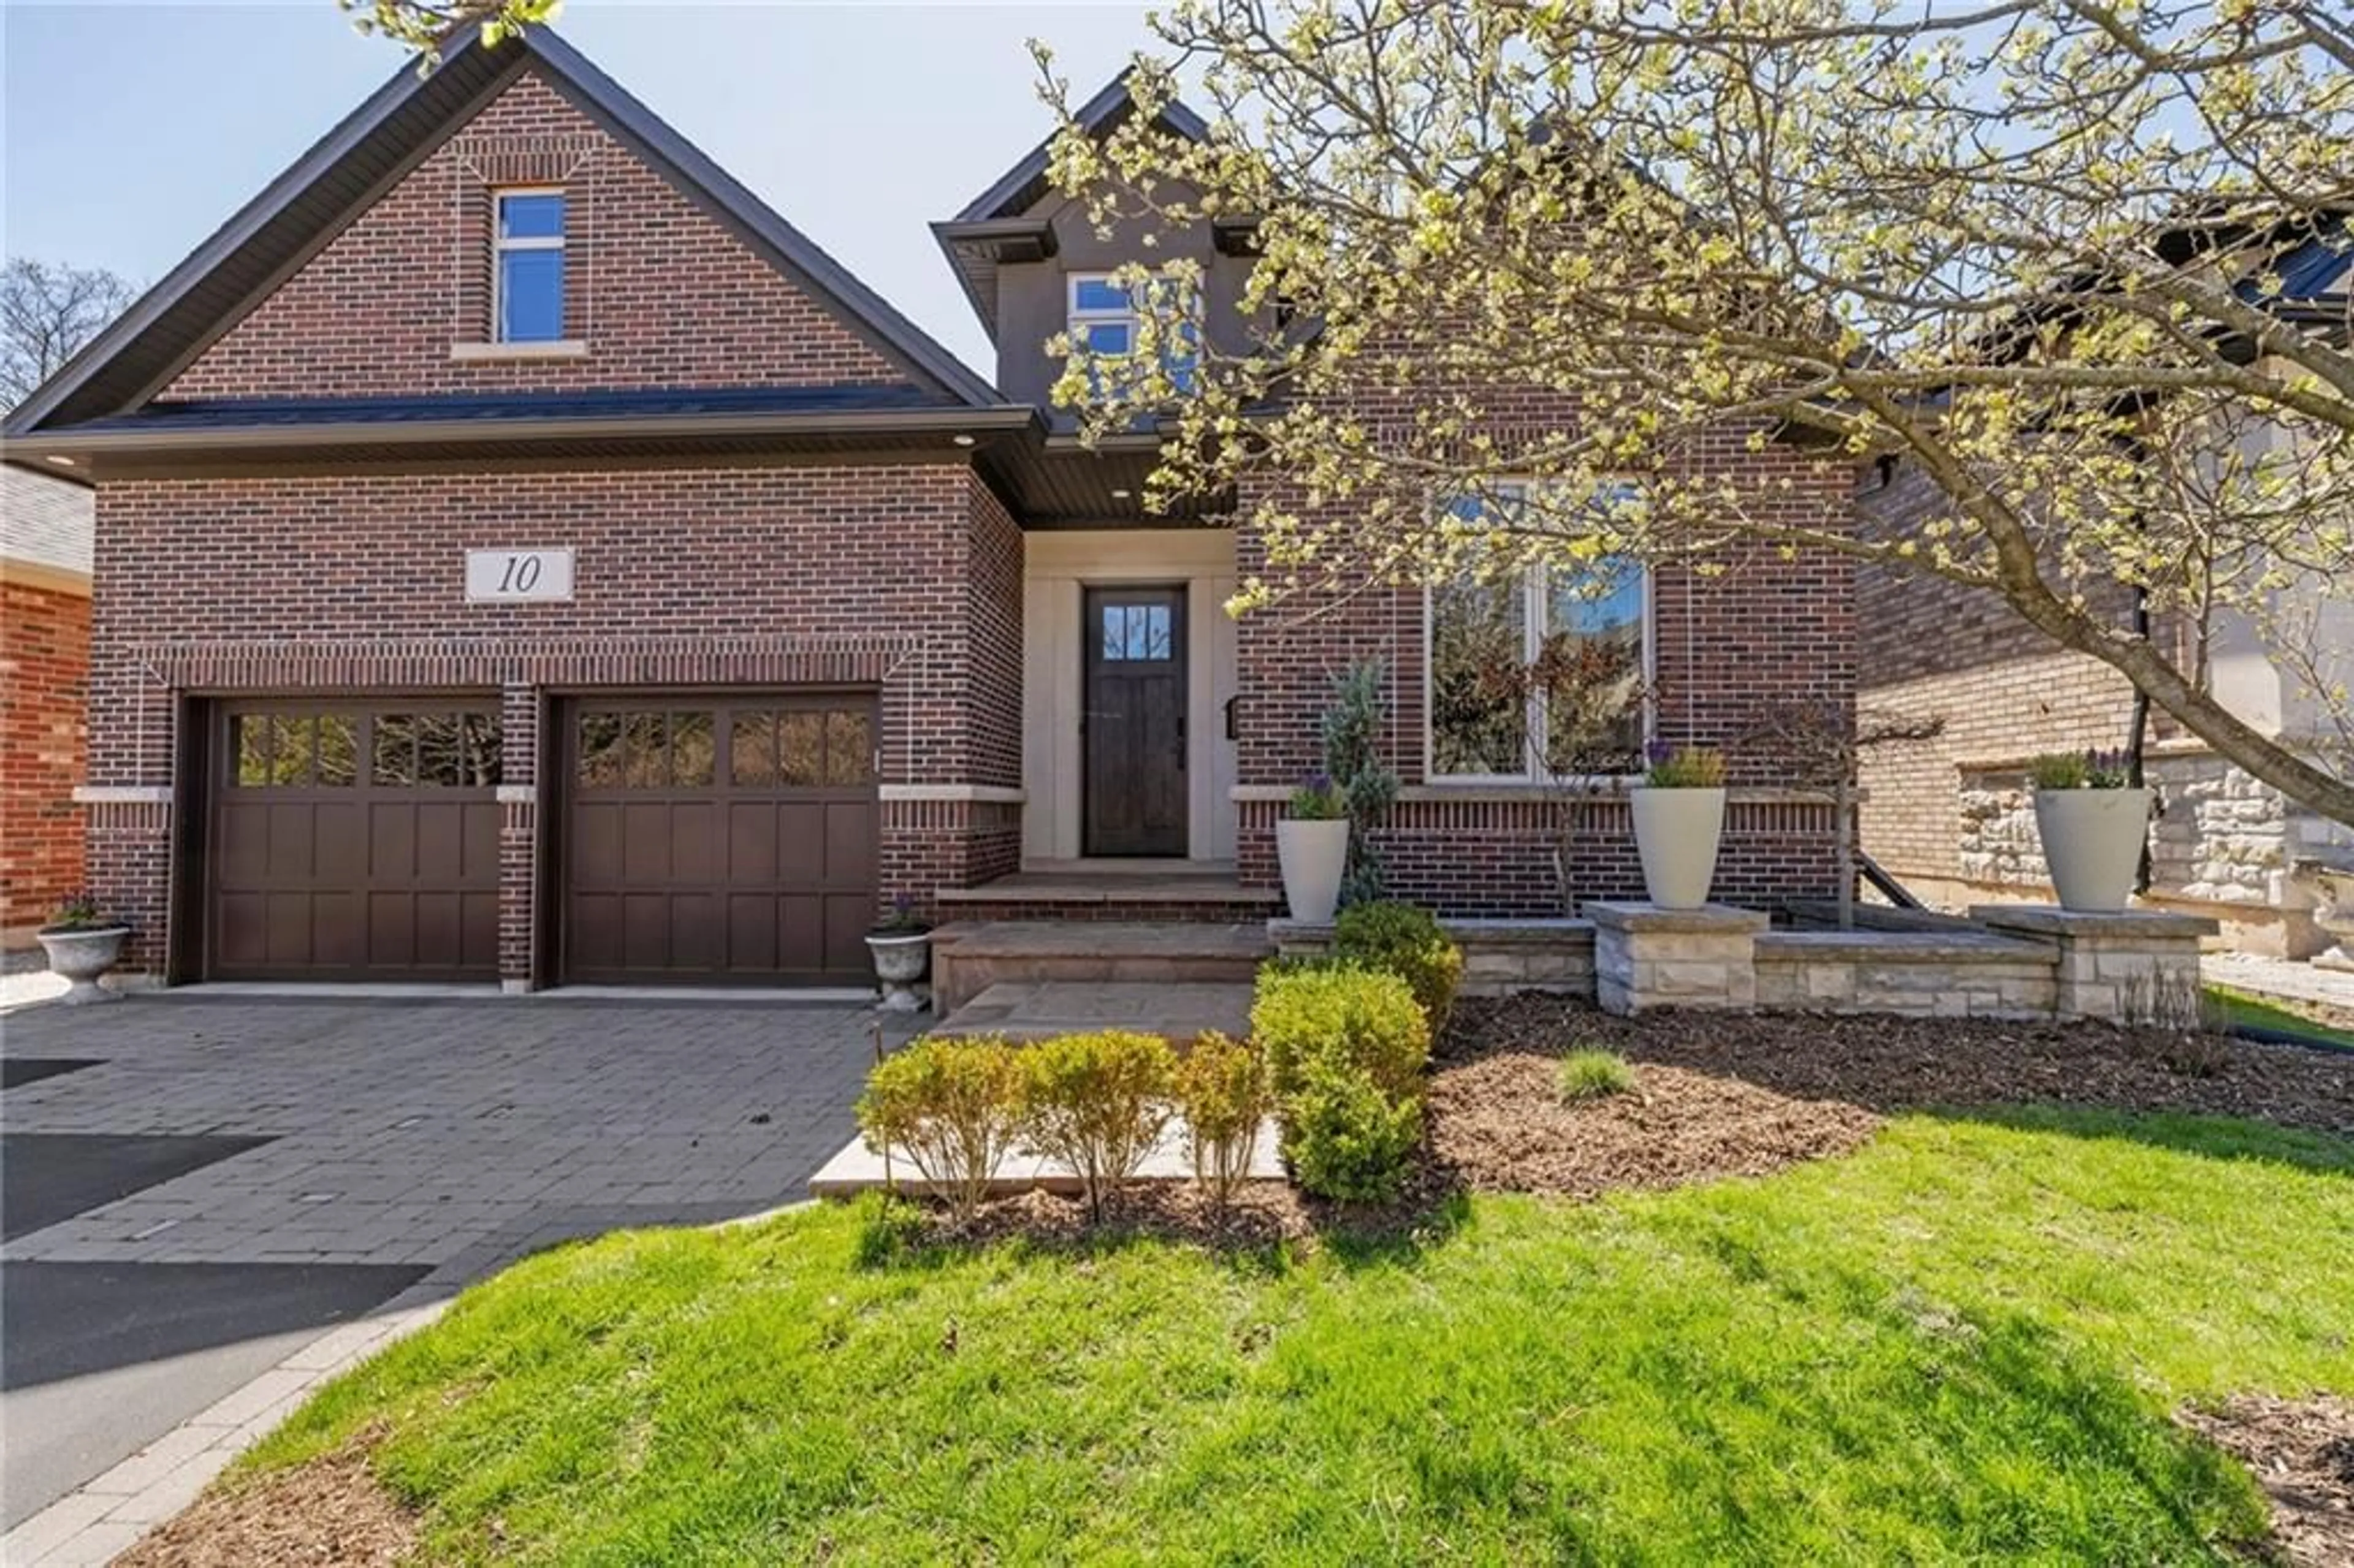 Home with brick exterior material for 976 Shadeland Ave #10, Burlington Ontario L7T 2M5